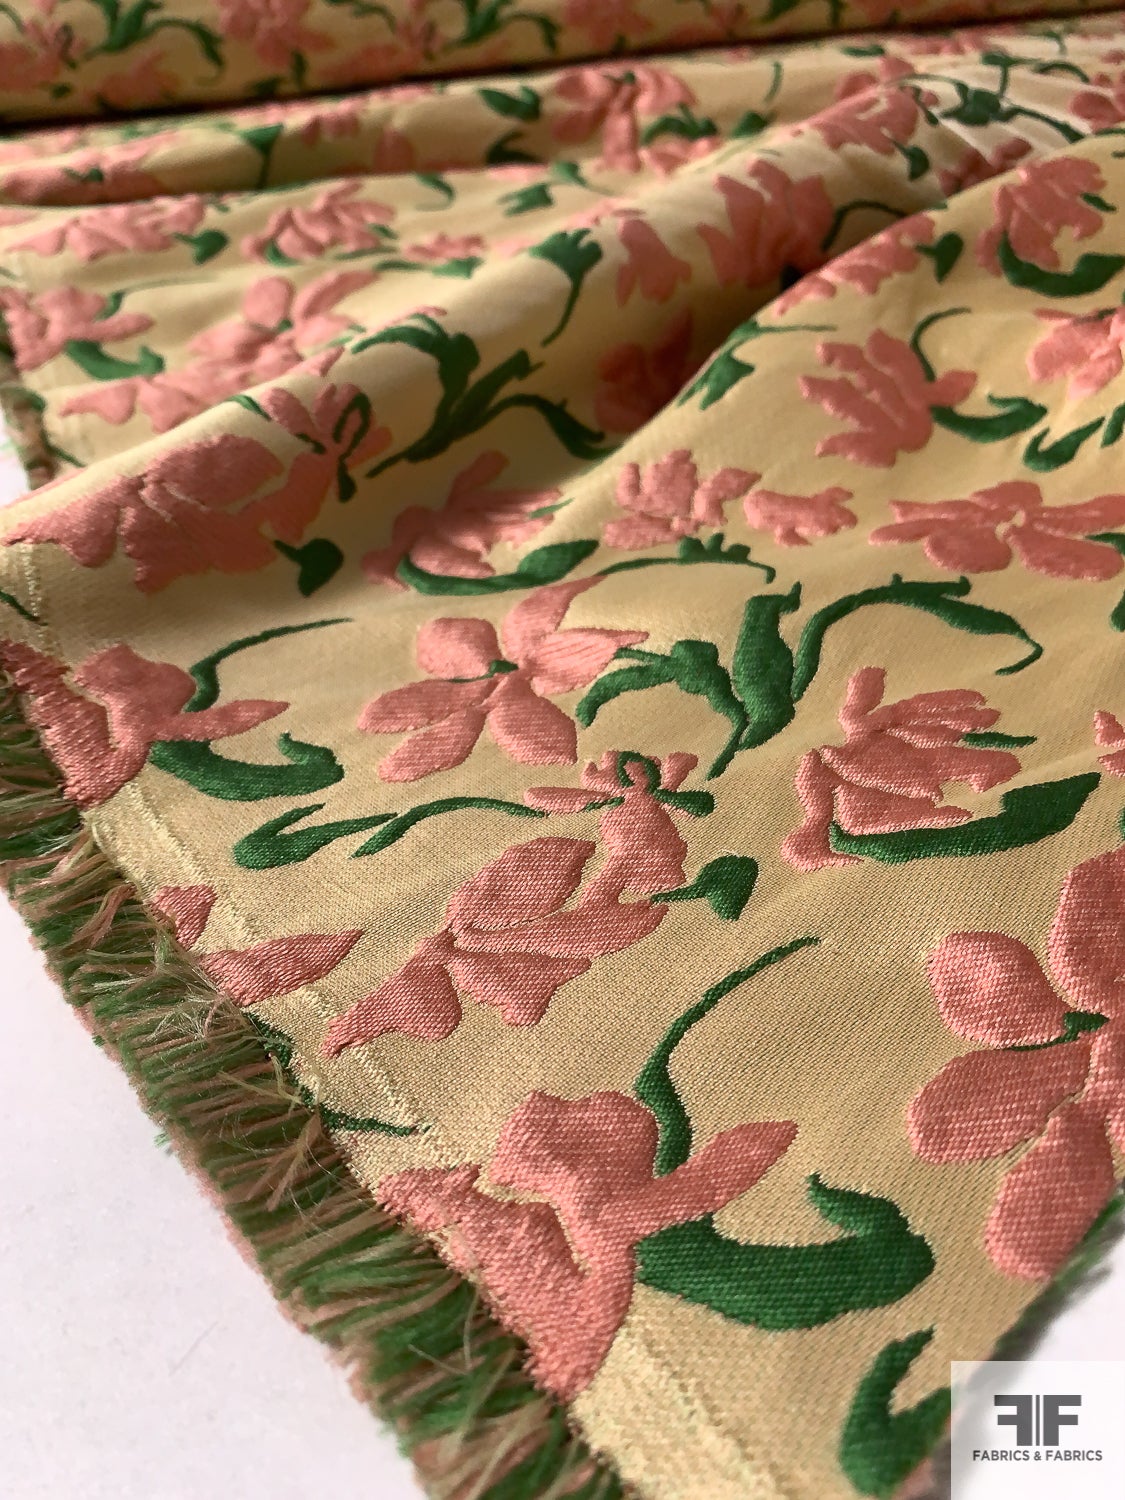 Floral Blossoms Textured Brocade - Dusty Pink / Green / Light Gold